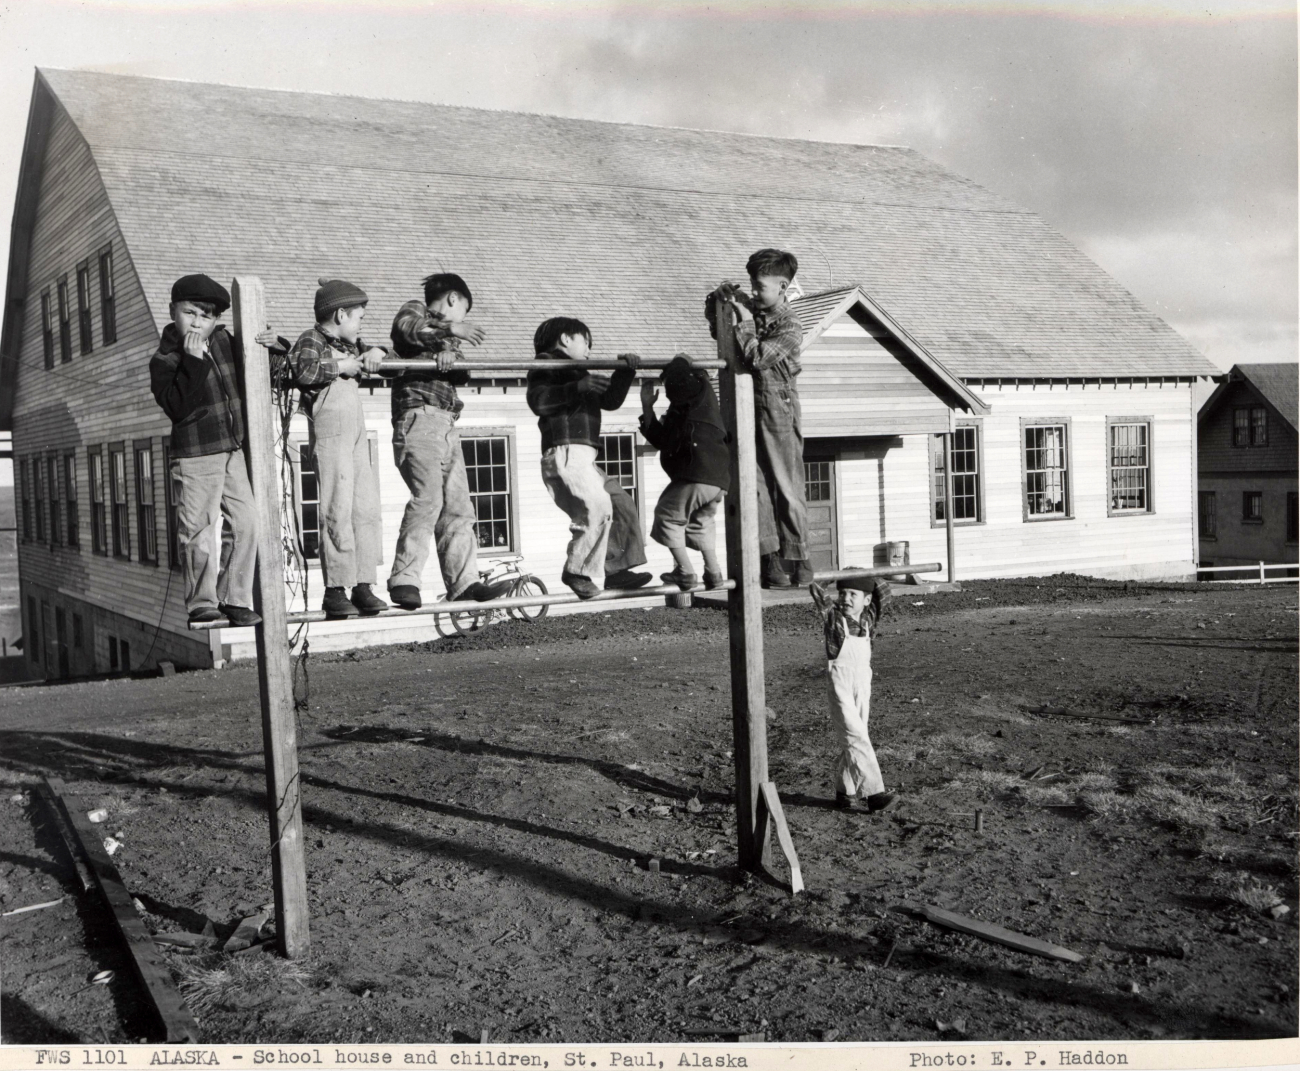 The schoolhouse with children playing at recess